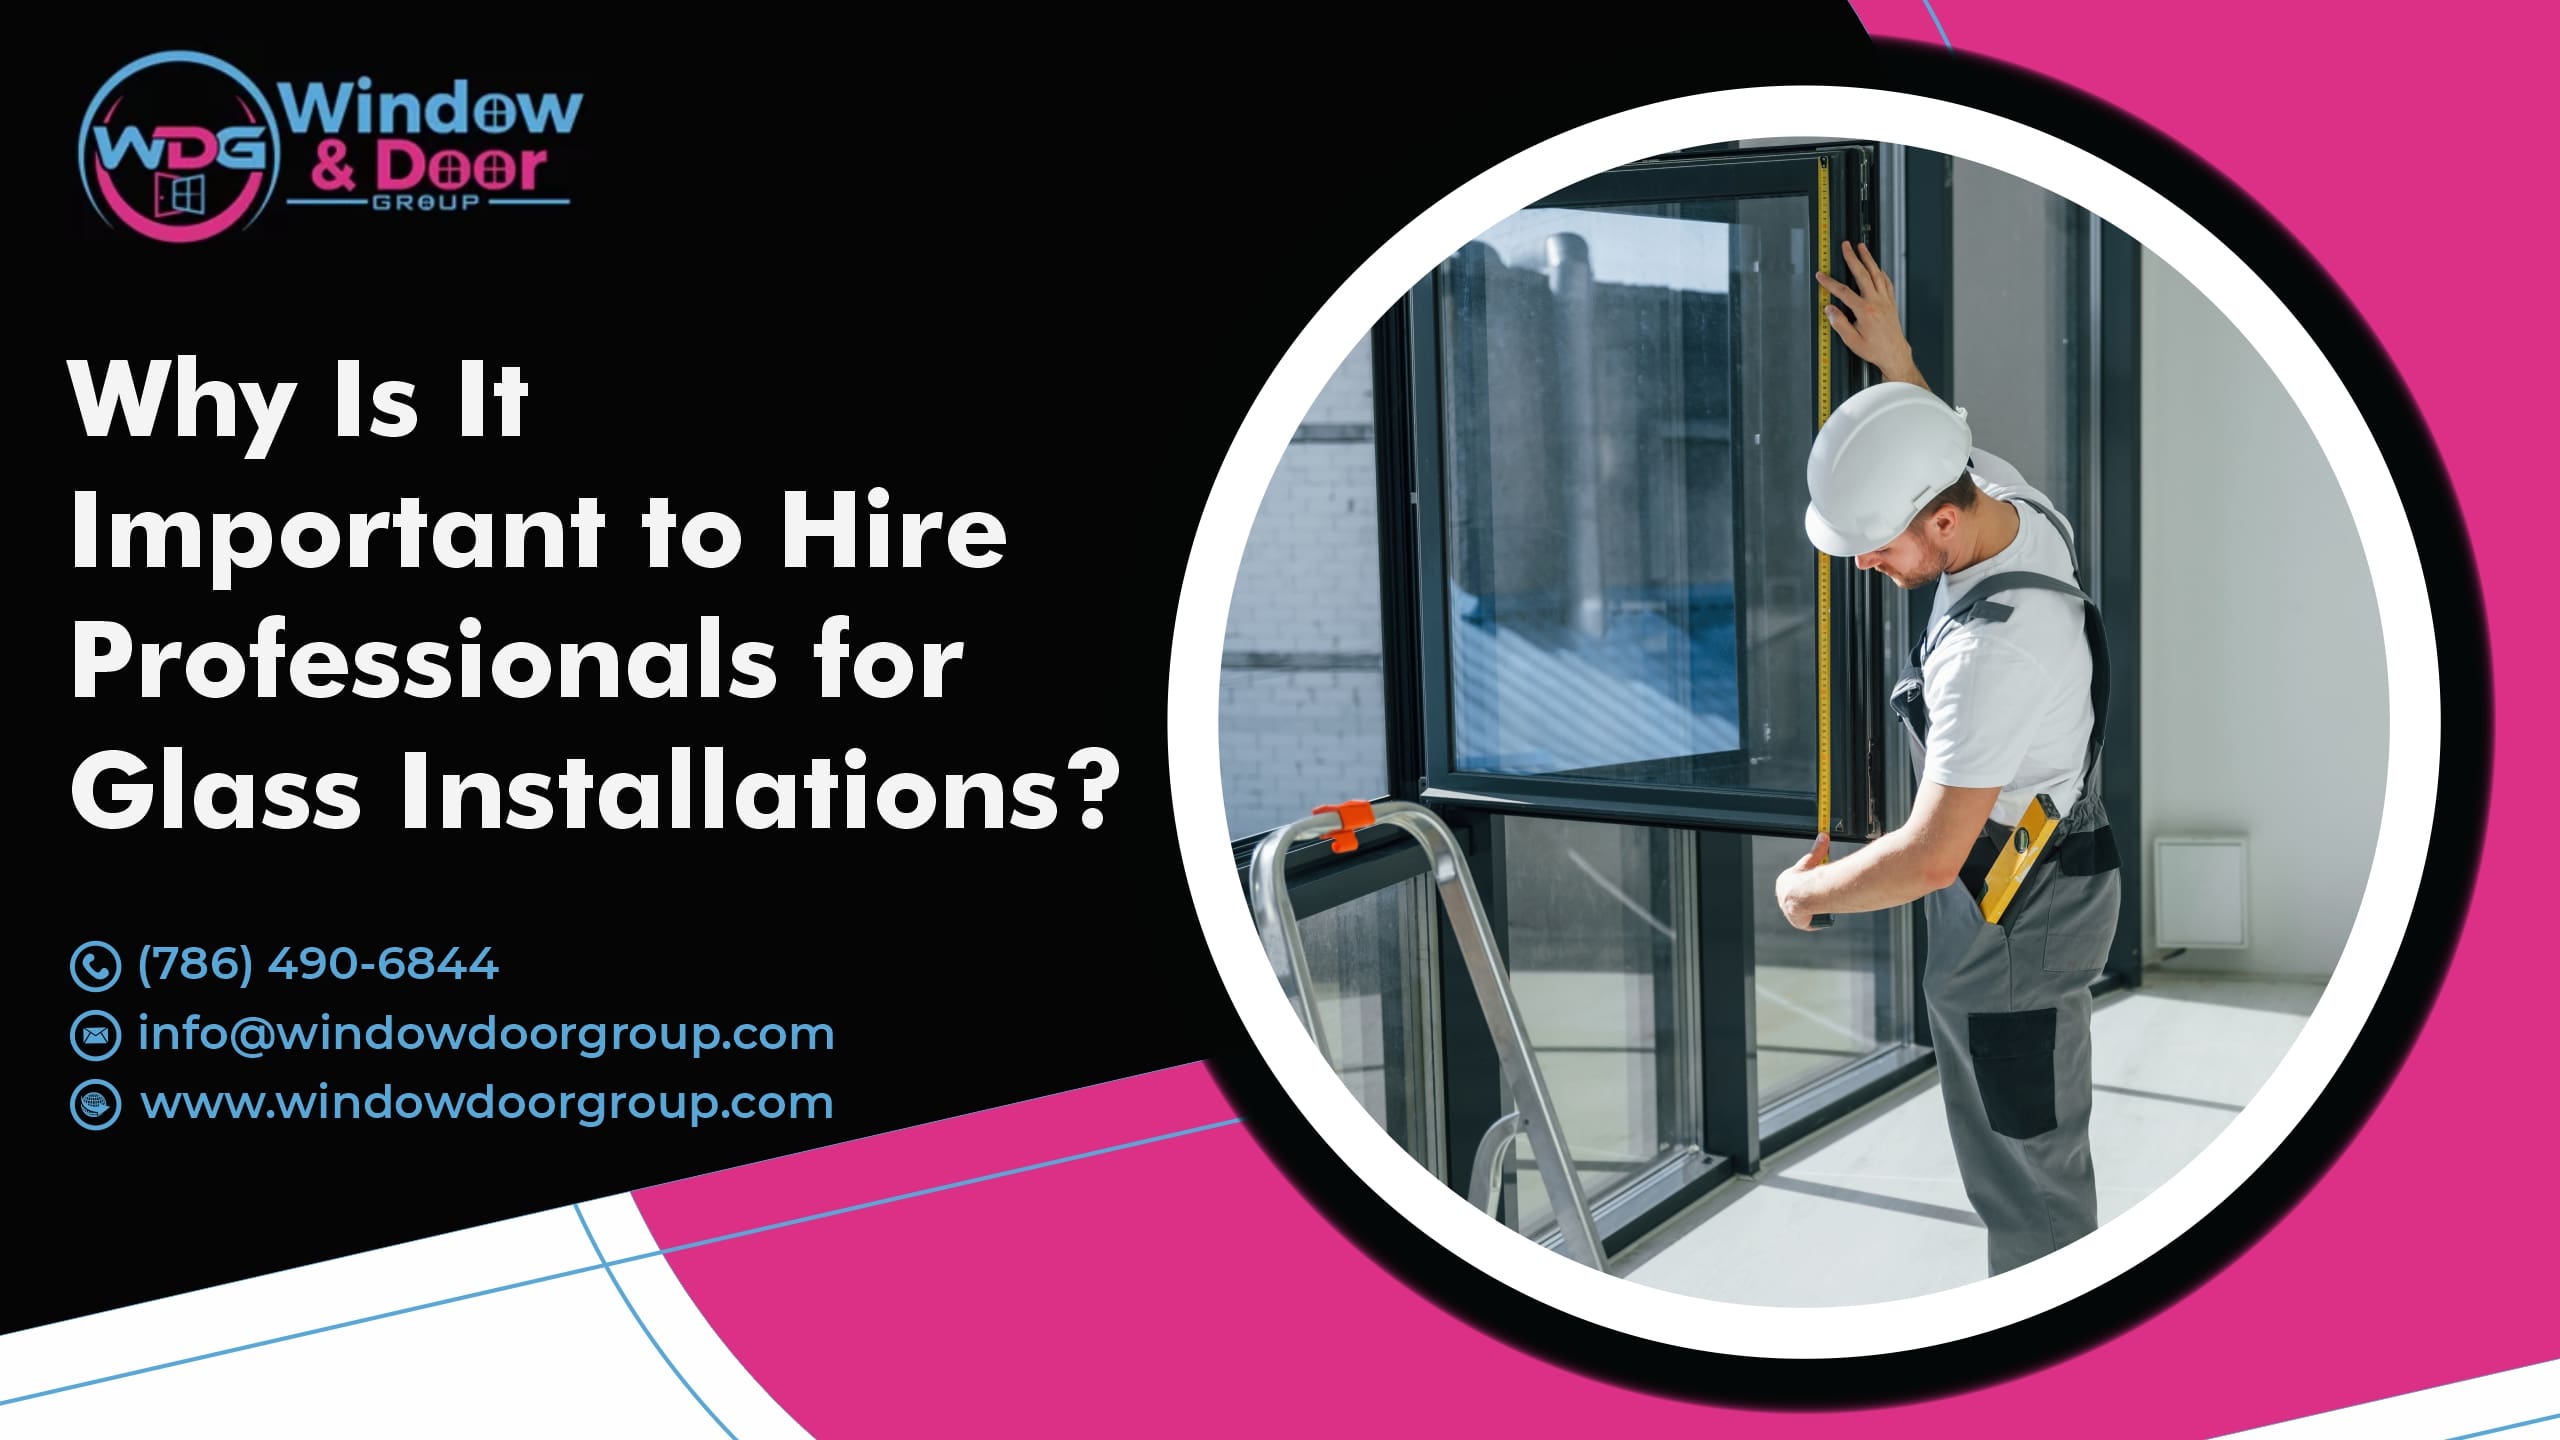 Why Is It Important To Hire Professionals For Glass Installations